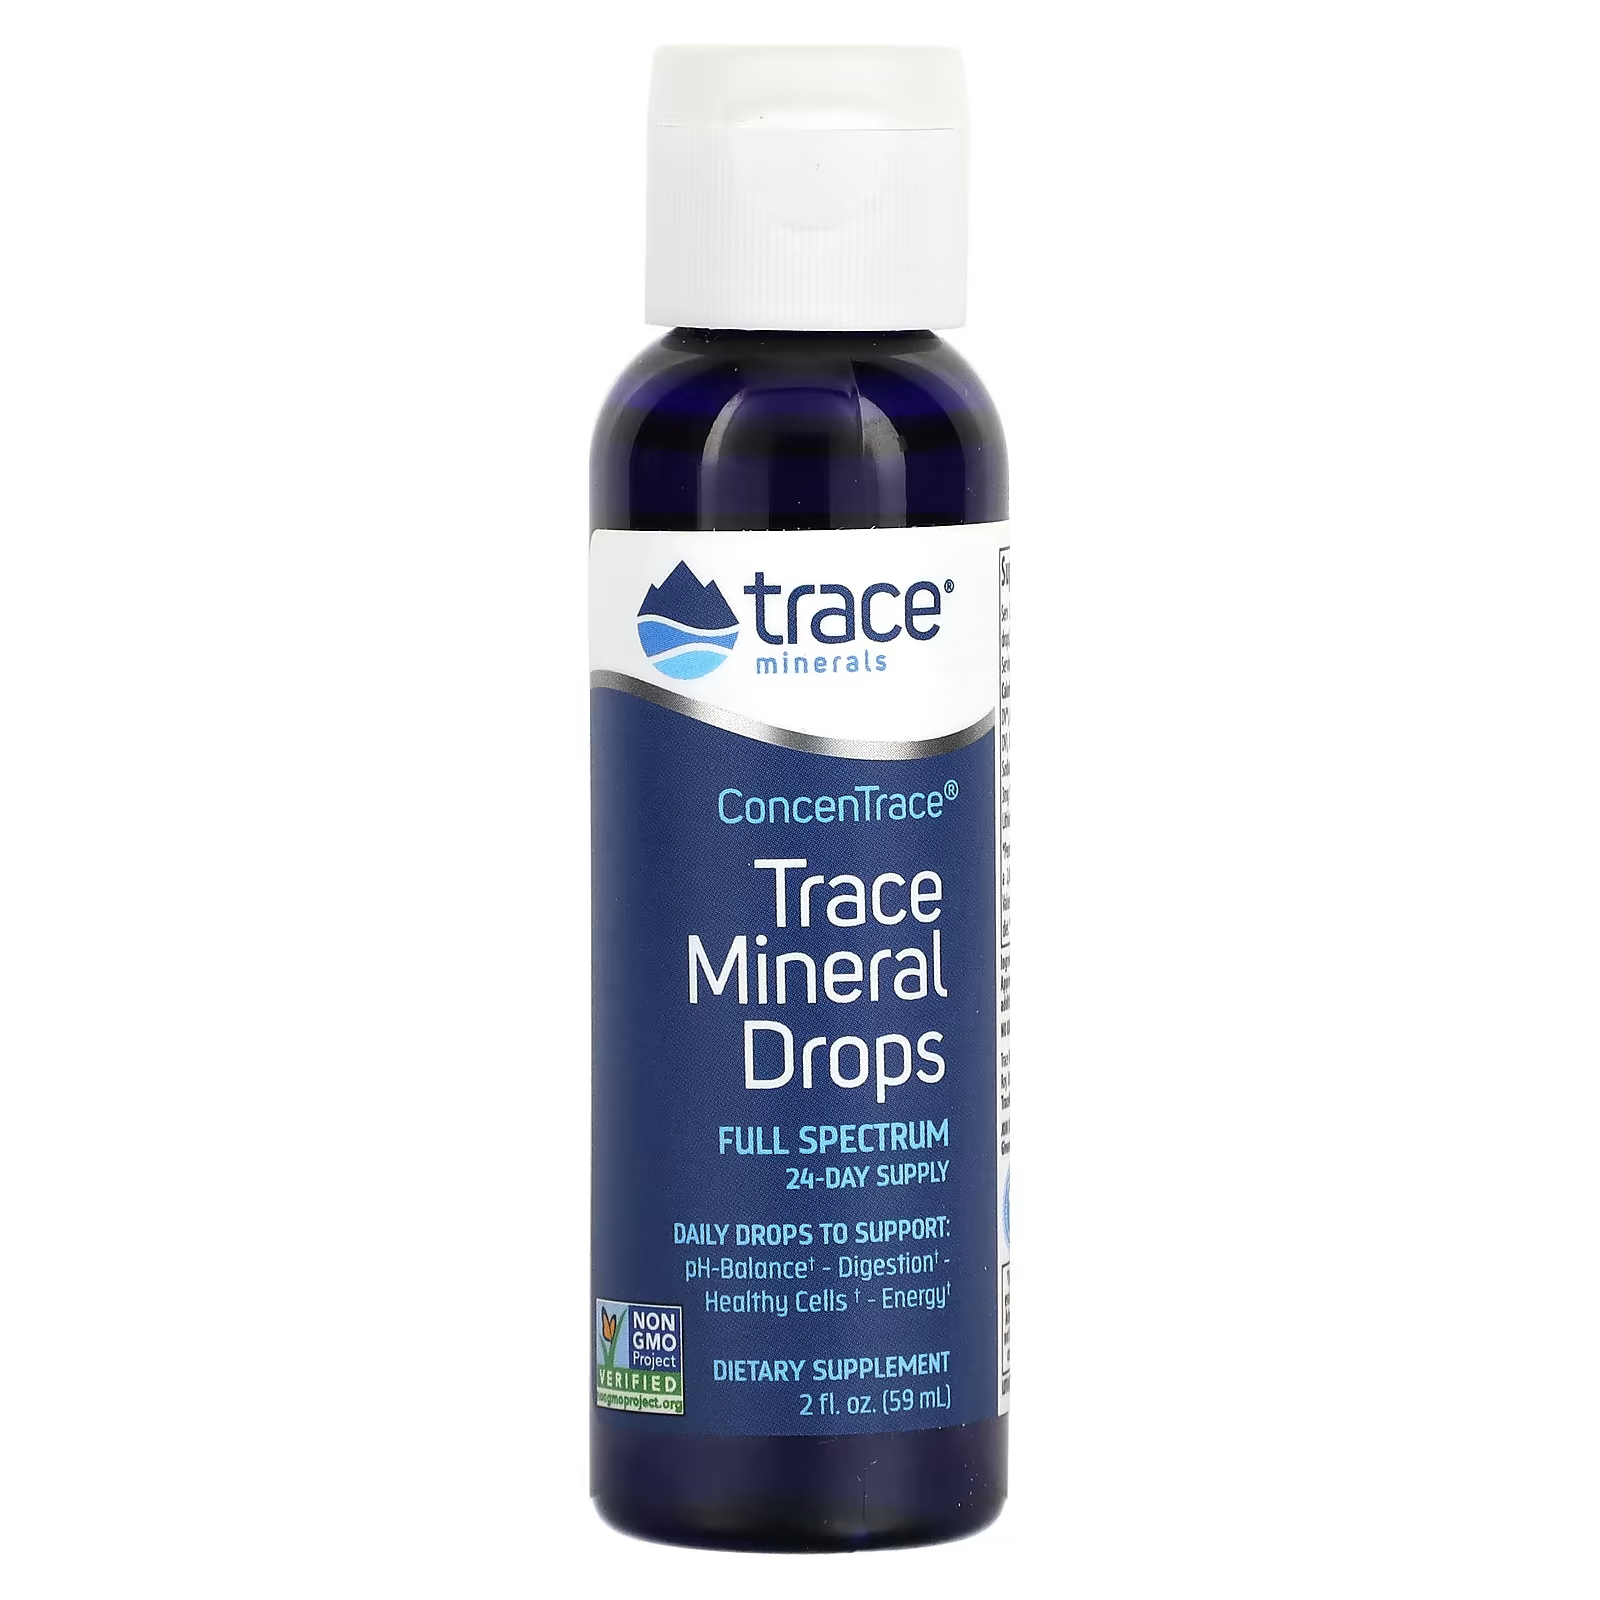 Капли Trace Minerals Concentrace с микроэлементами, 59 мл trace minerals research concentrace капли с микроэлементами 118 мл